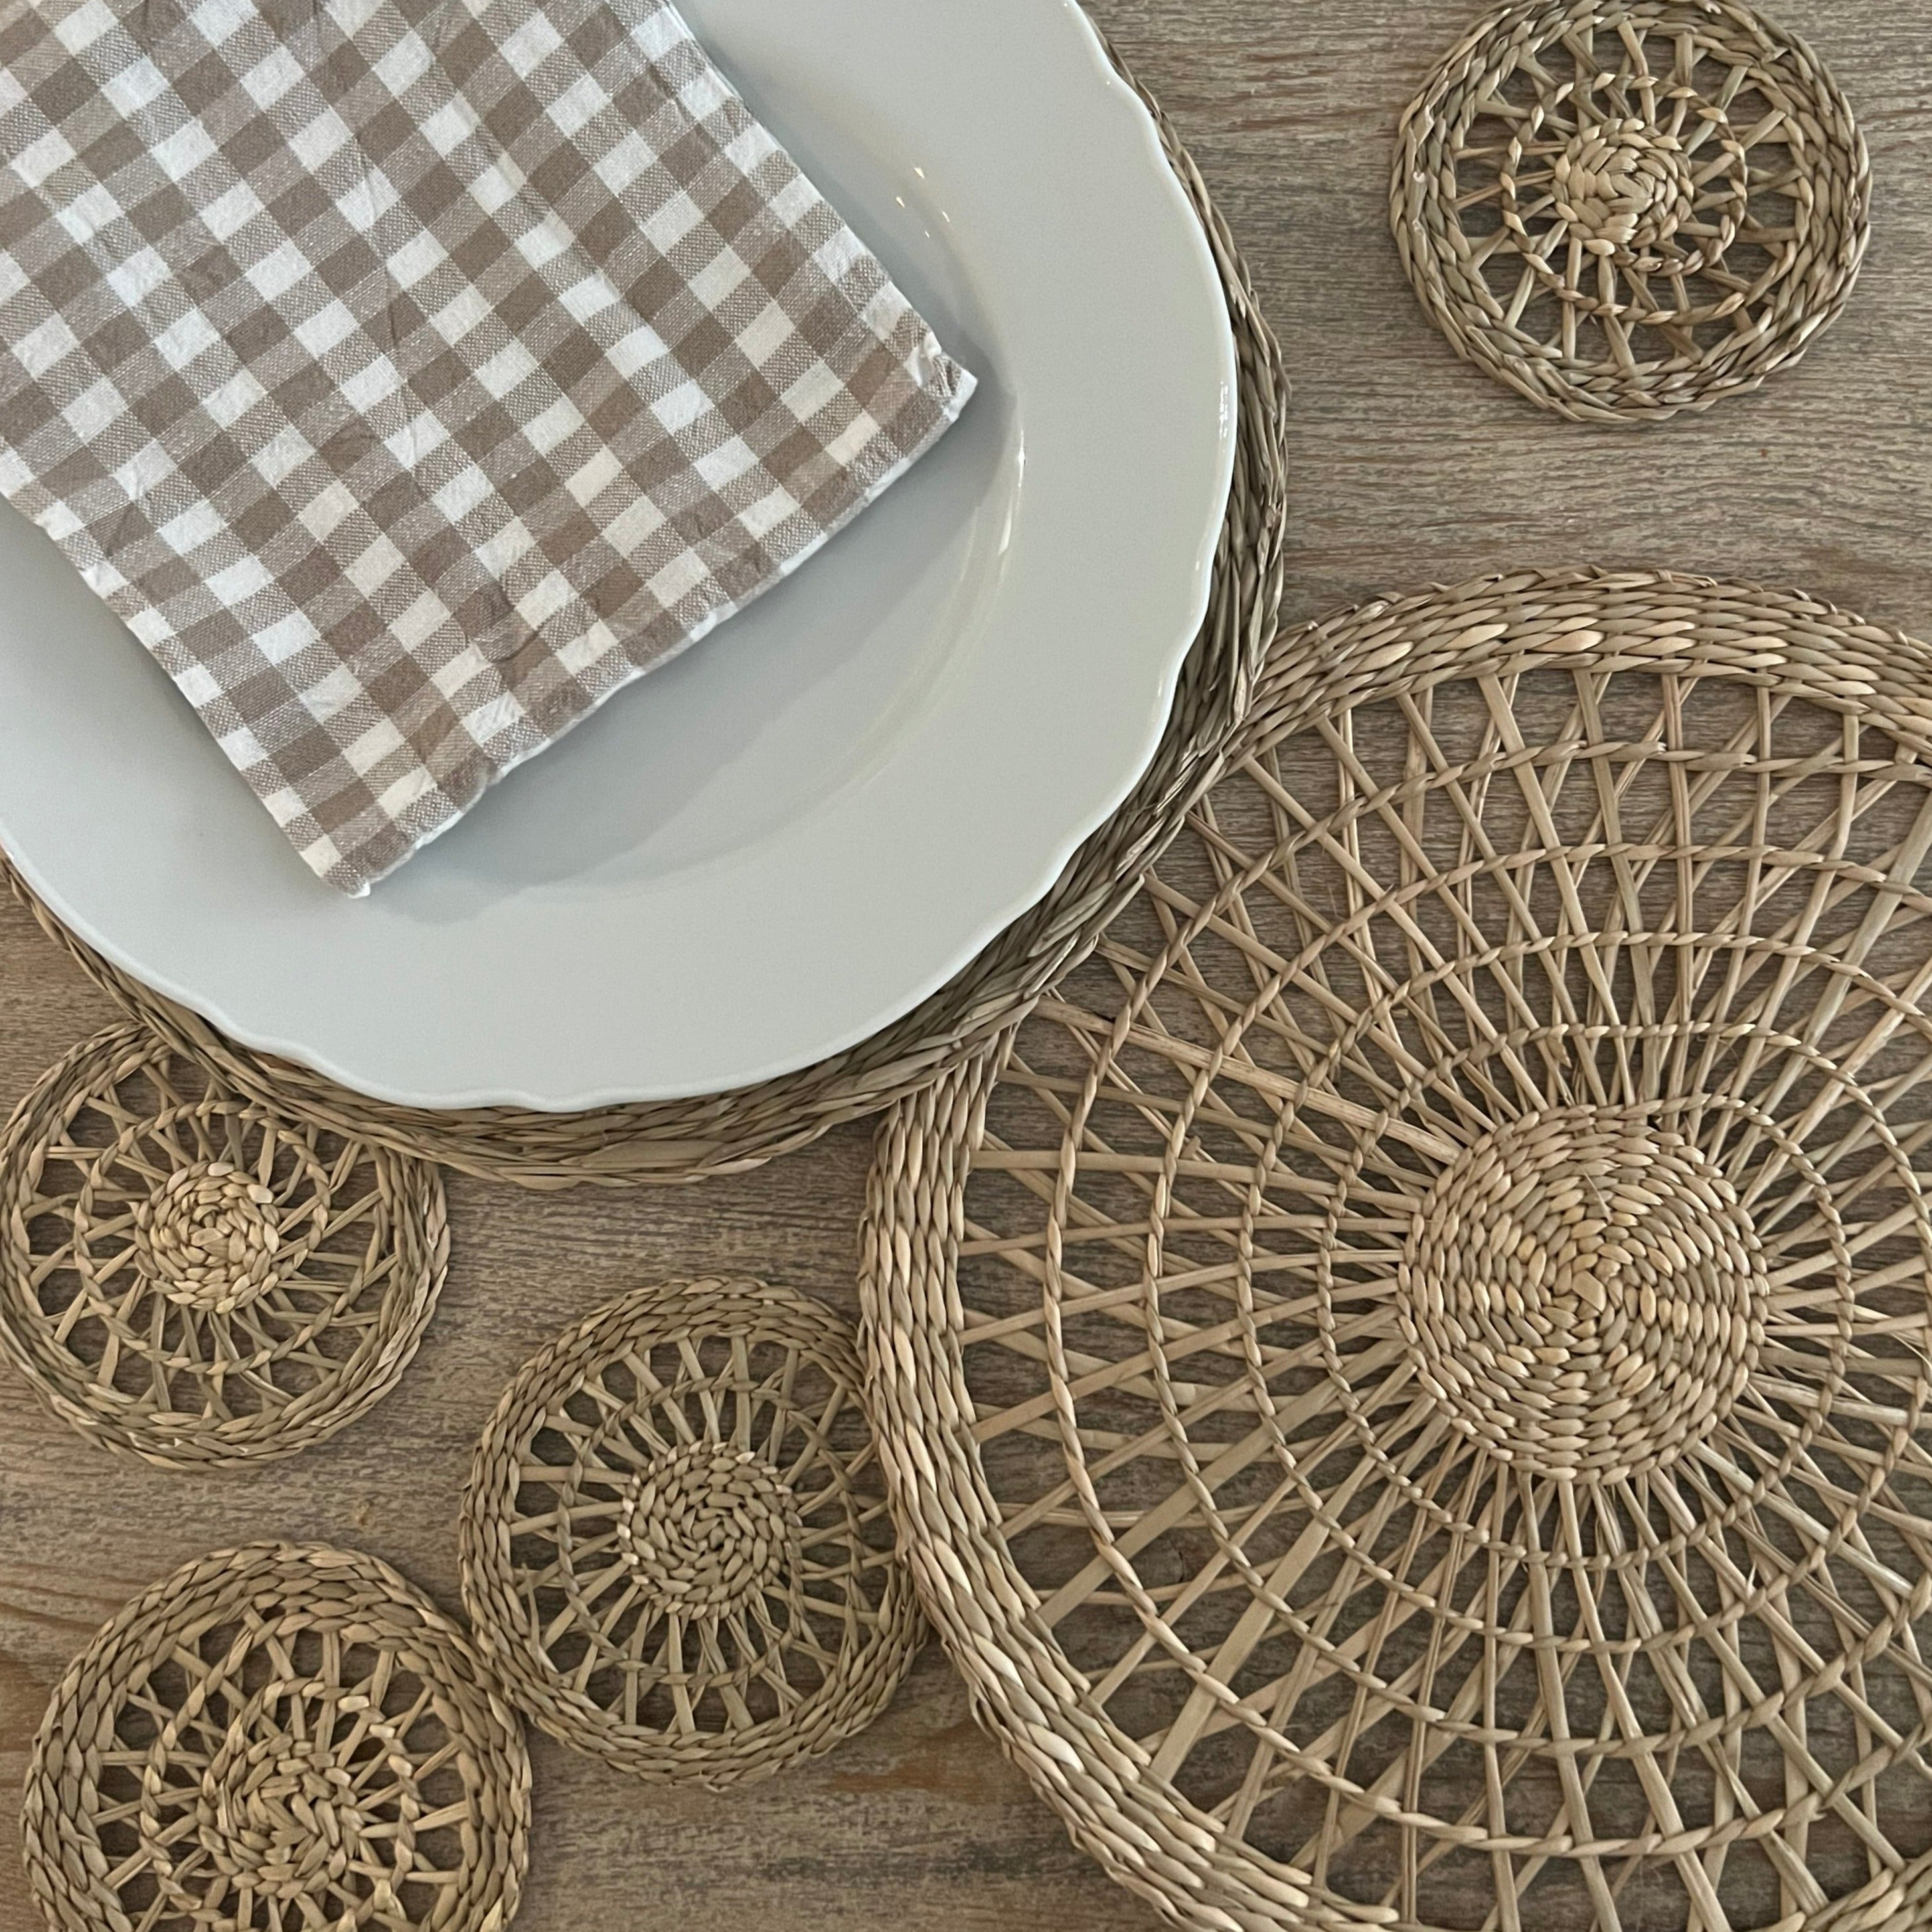 Set of Four Seagrass Placemats & Coasters